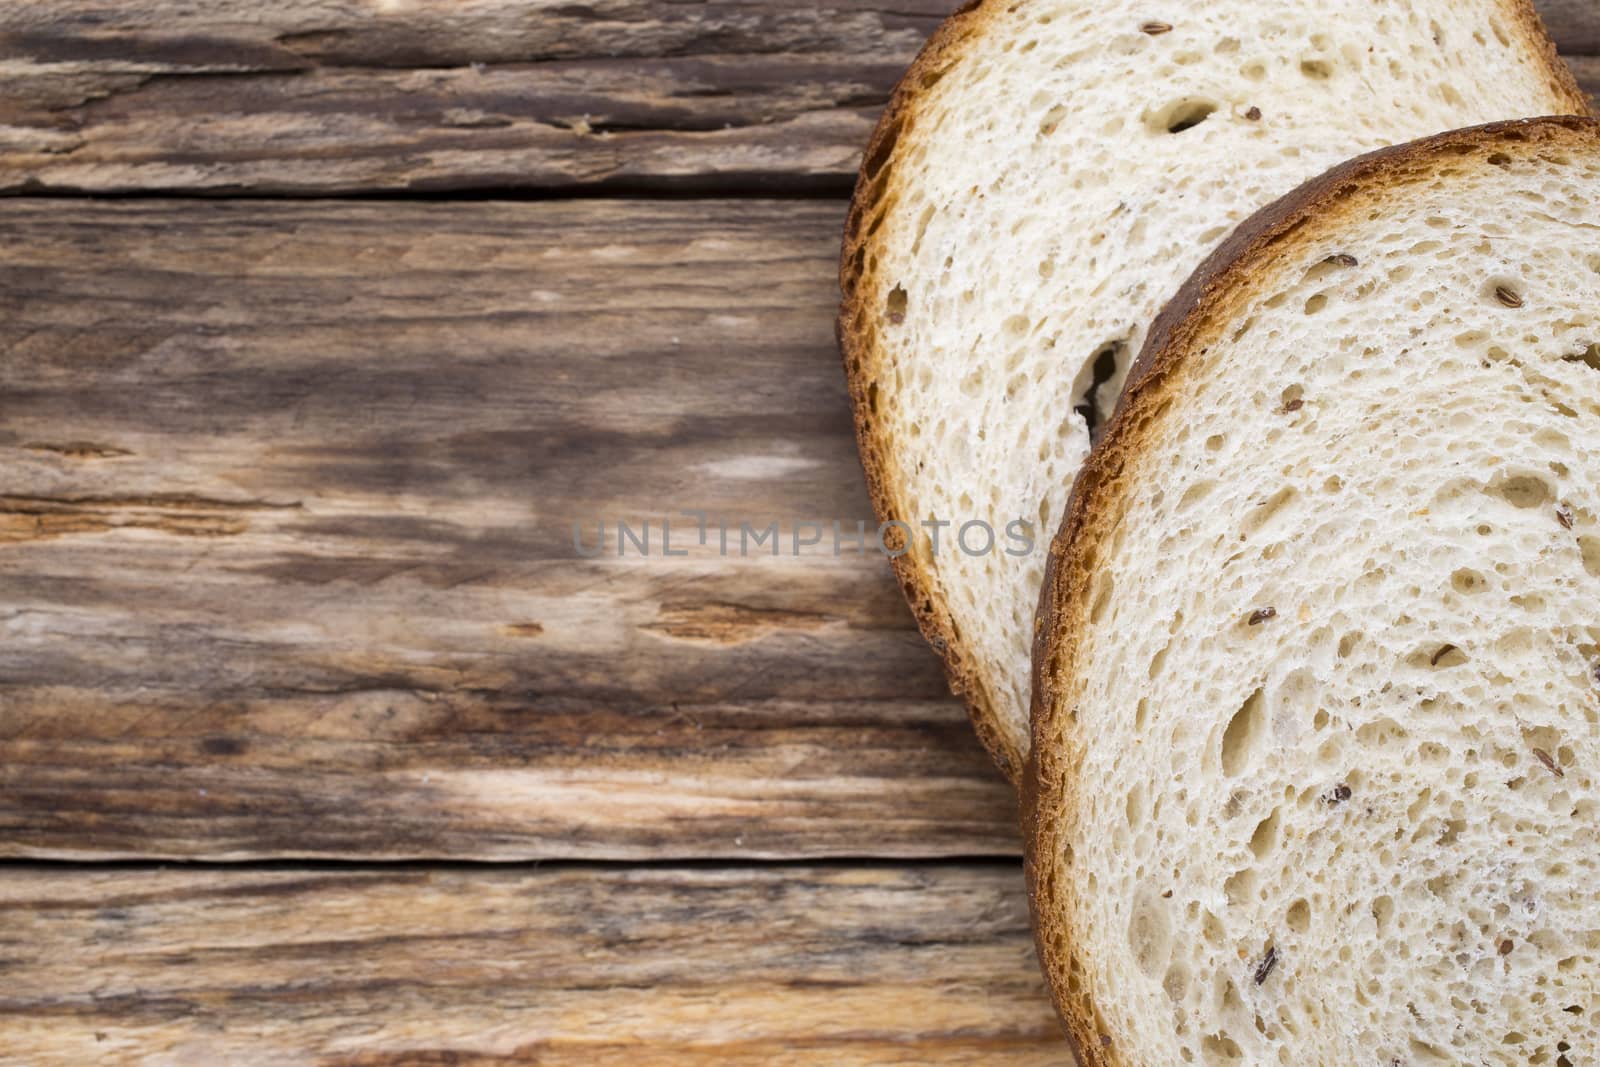 Slices of bread on a wooden background.
